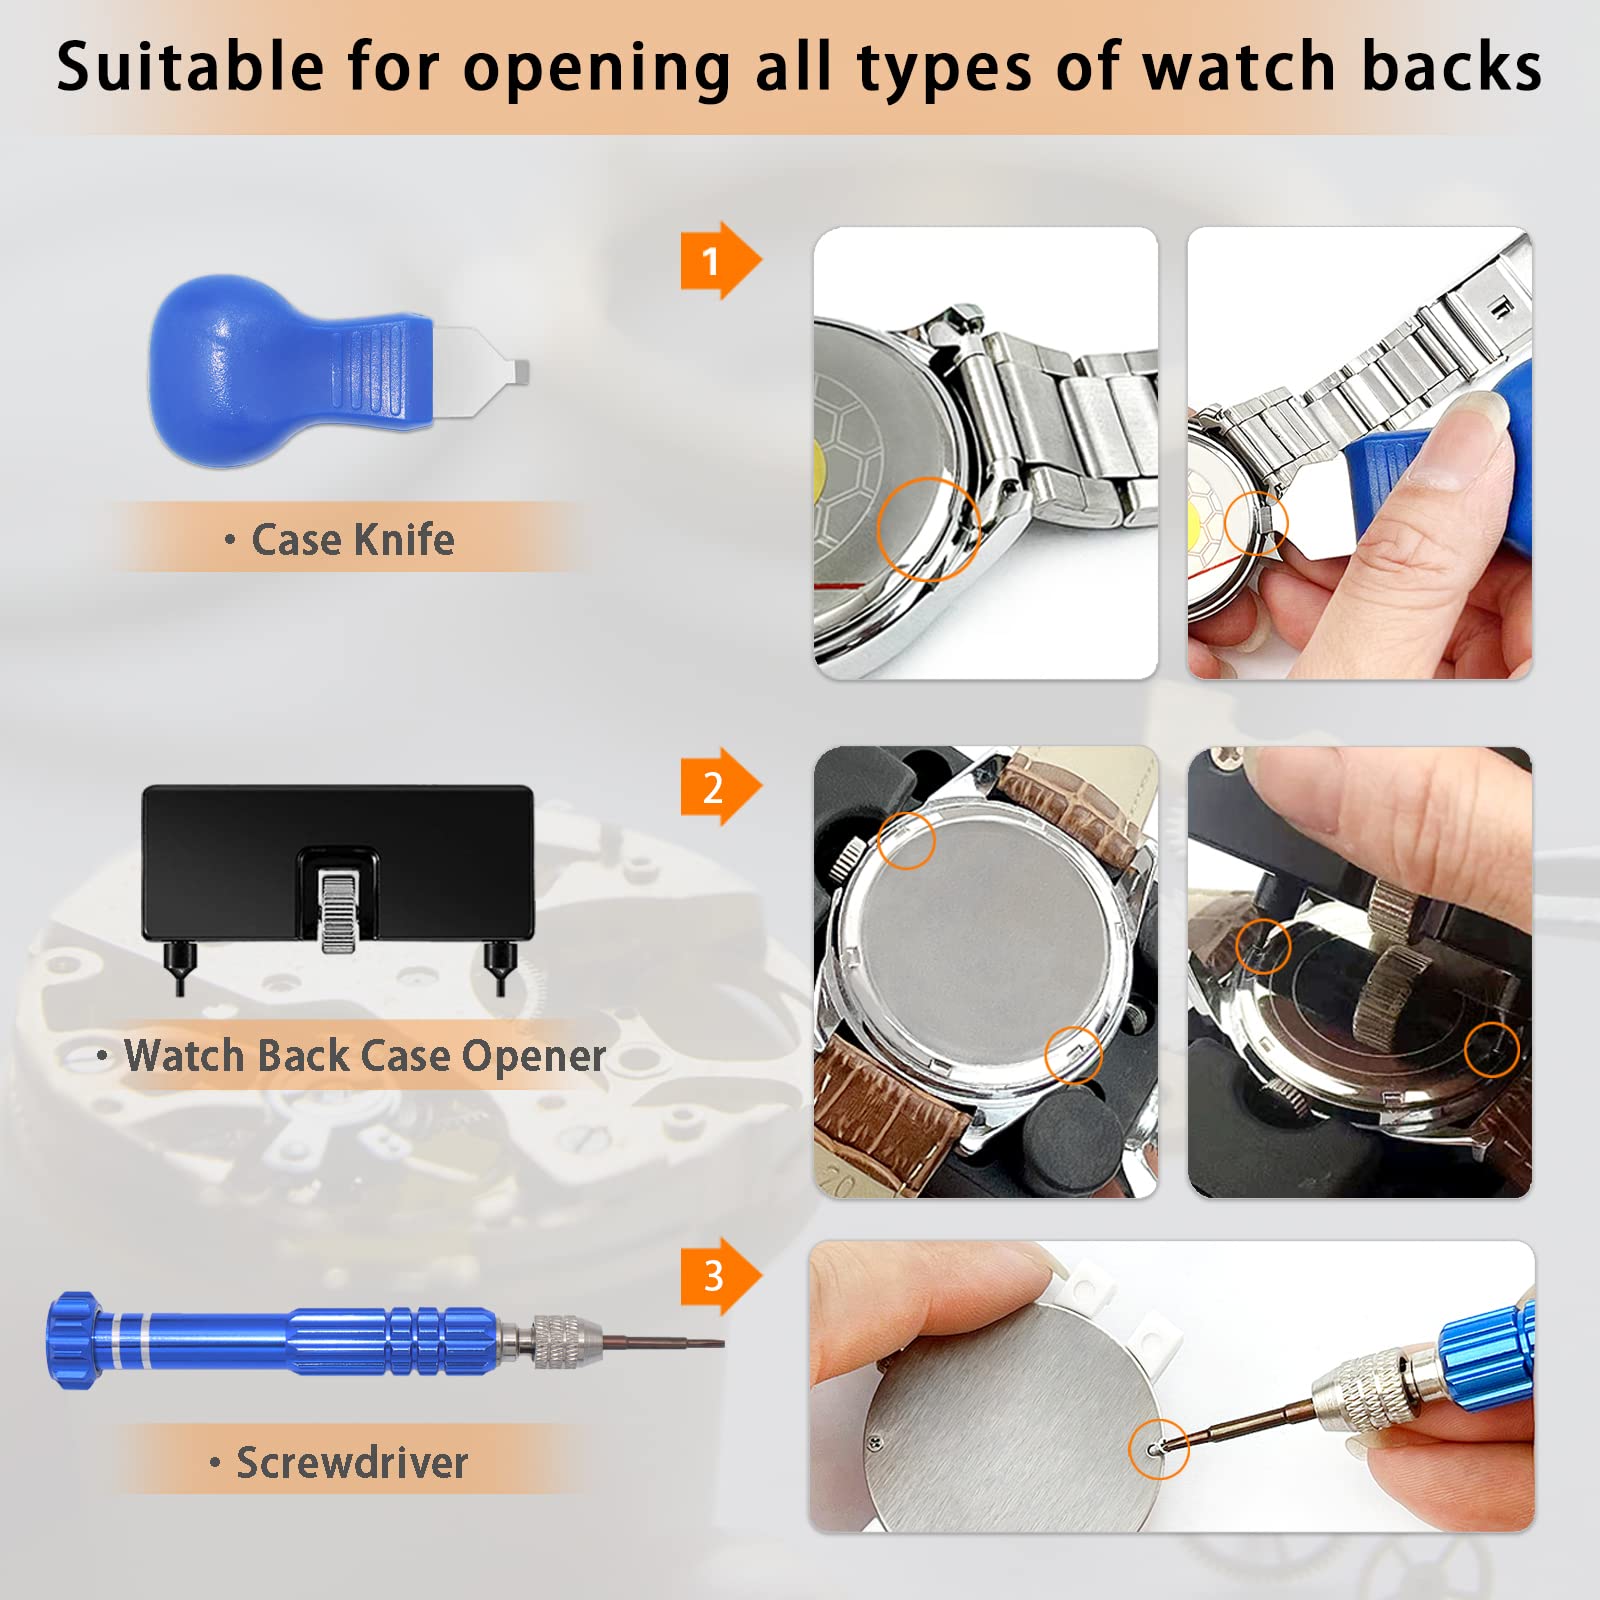 Professional Watch Repair Kit, GLDCAPA Watch Battery Replacement Kit, Watch Repair Tools with Carrying Case, Watch Link Removal Tool Kit, Watch Case Opener, Watch Press Set with 60pcs Watch Battery